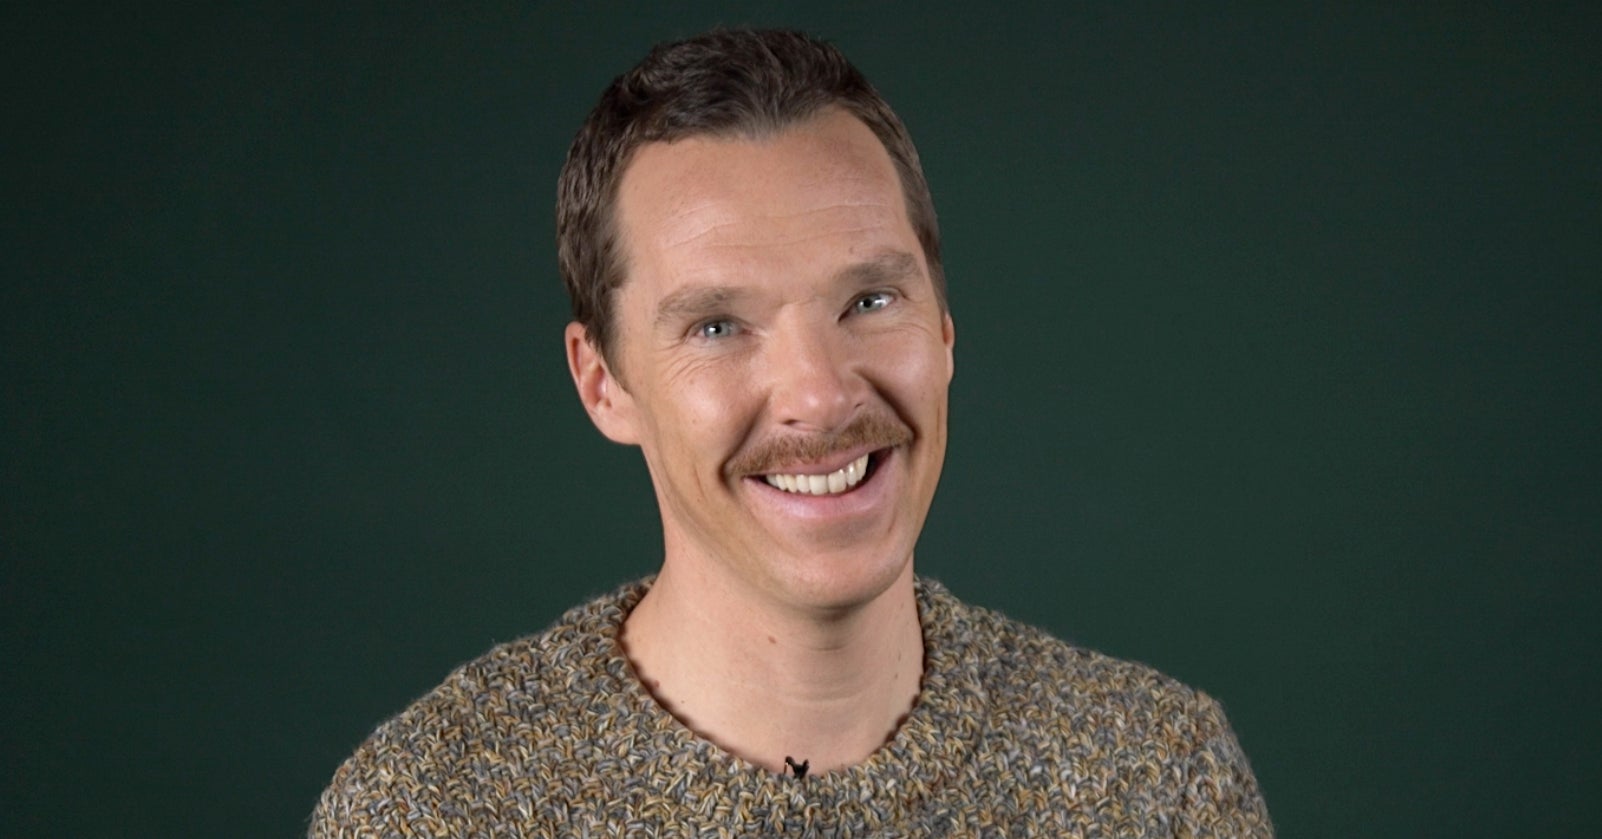 33 Things You Probably Didn't Know About Benedict